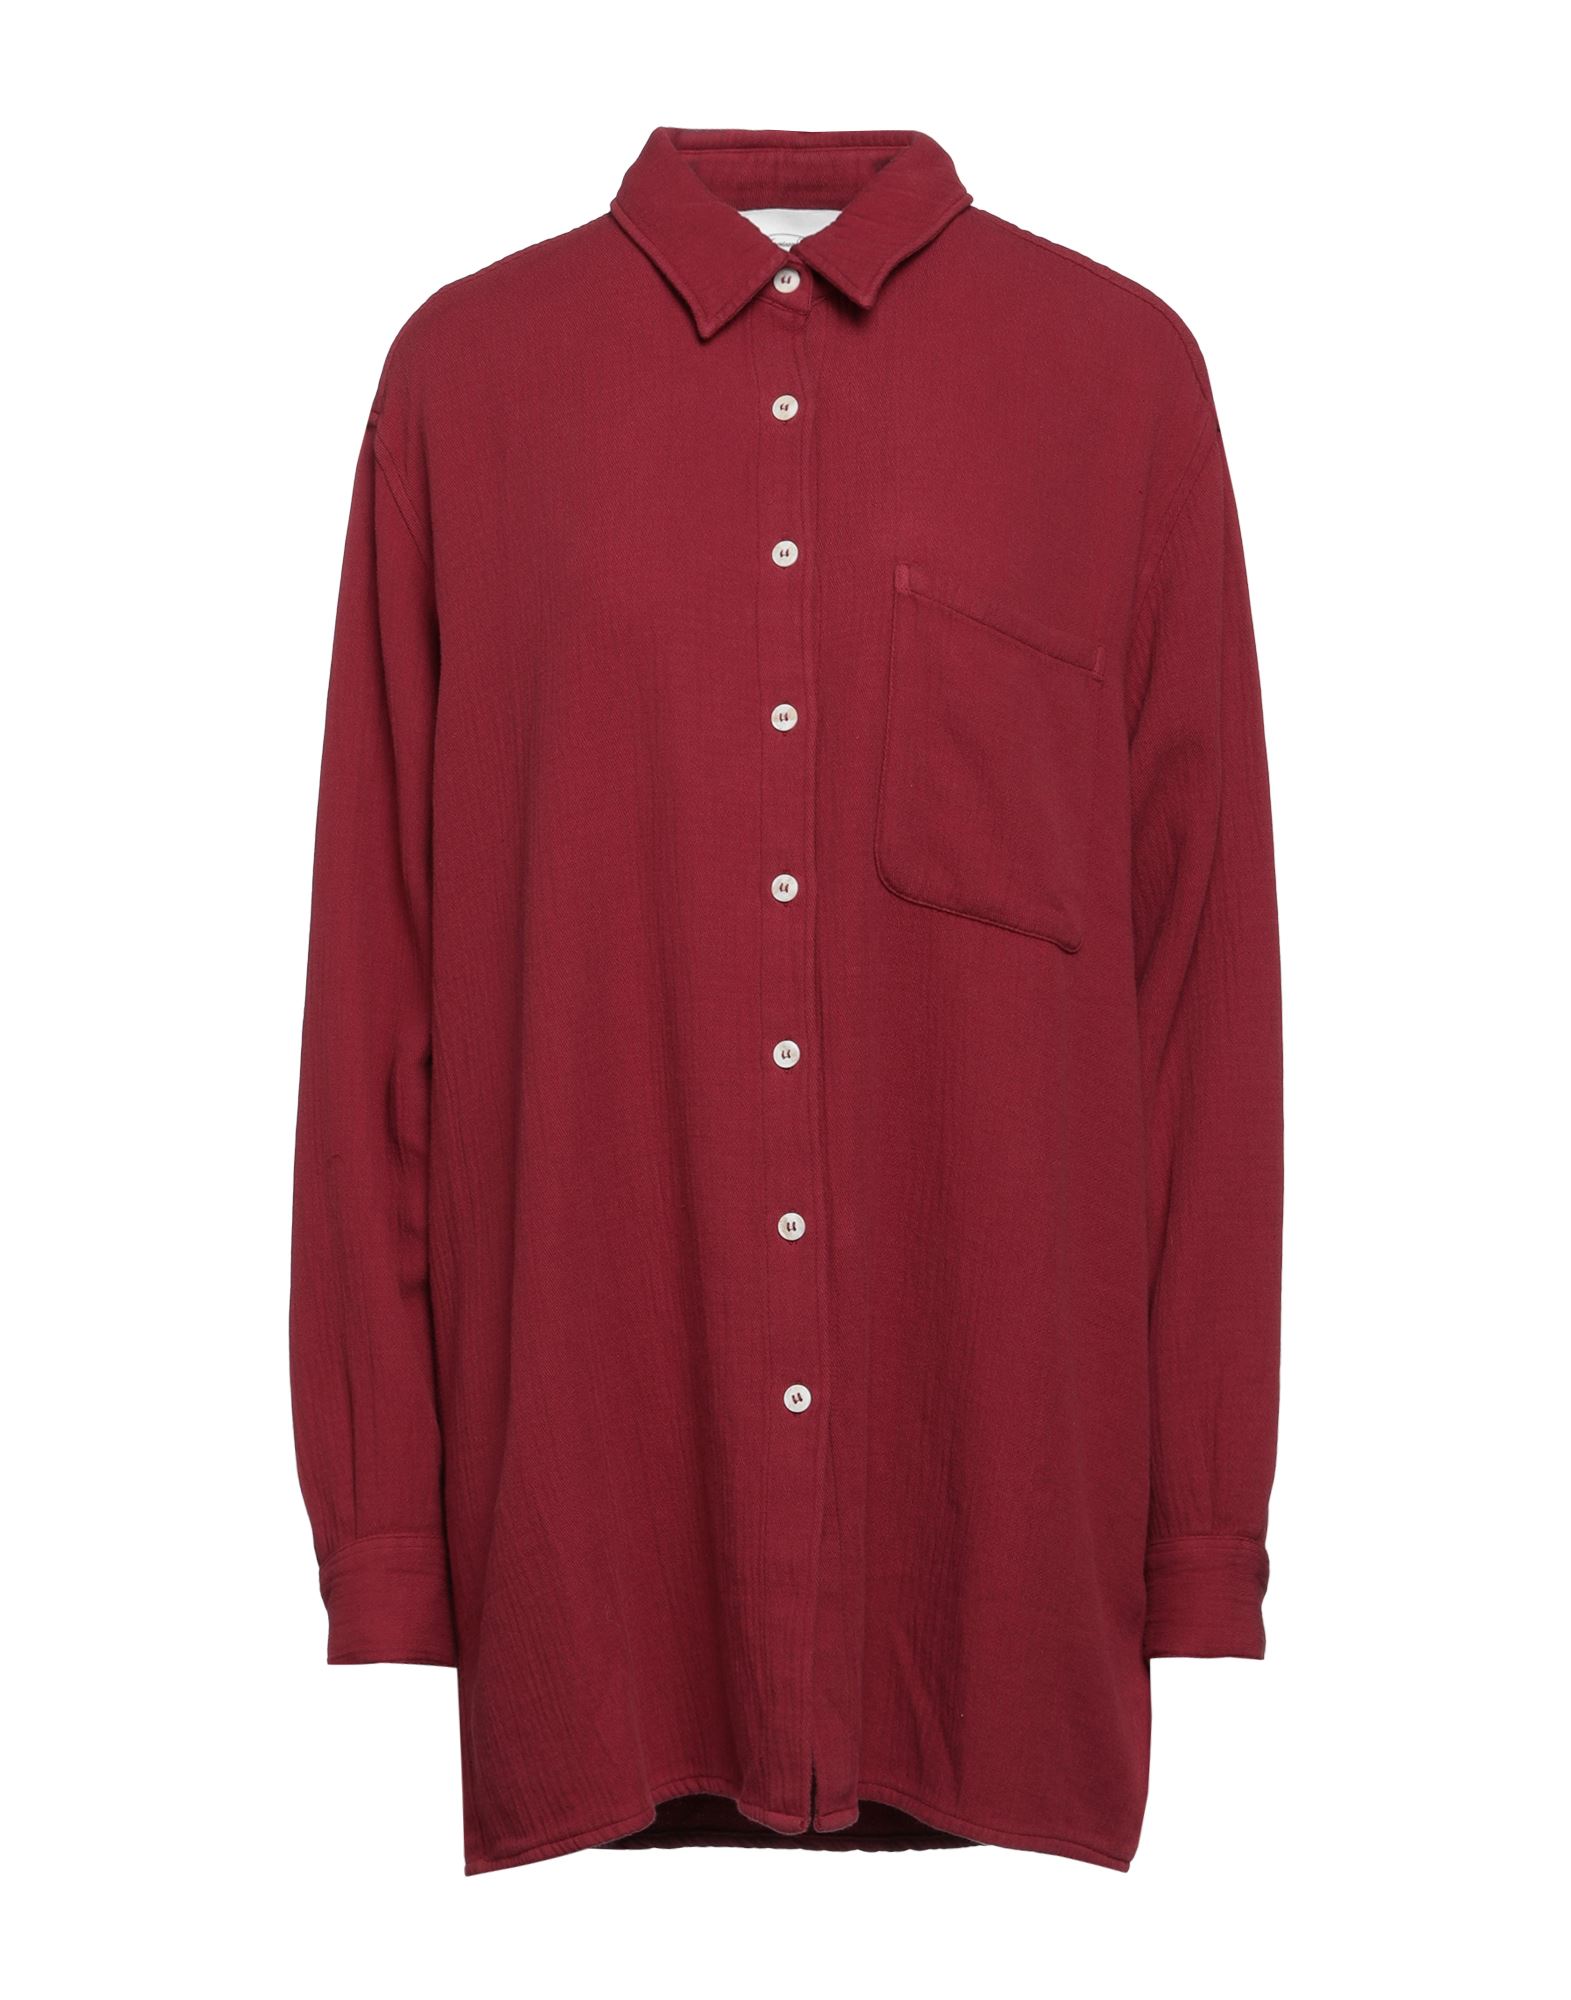 American Vintage Shirts In Red